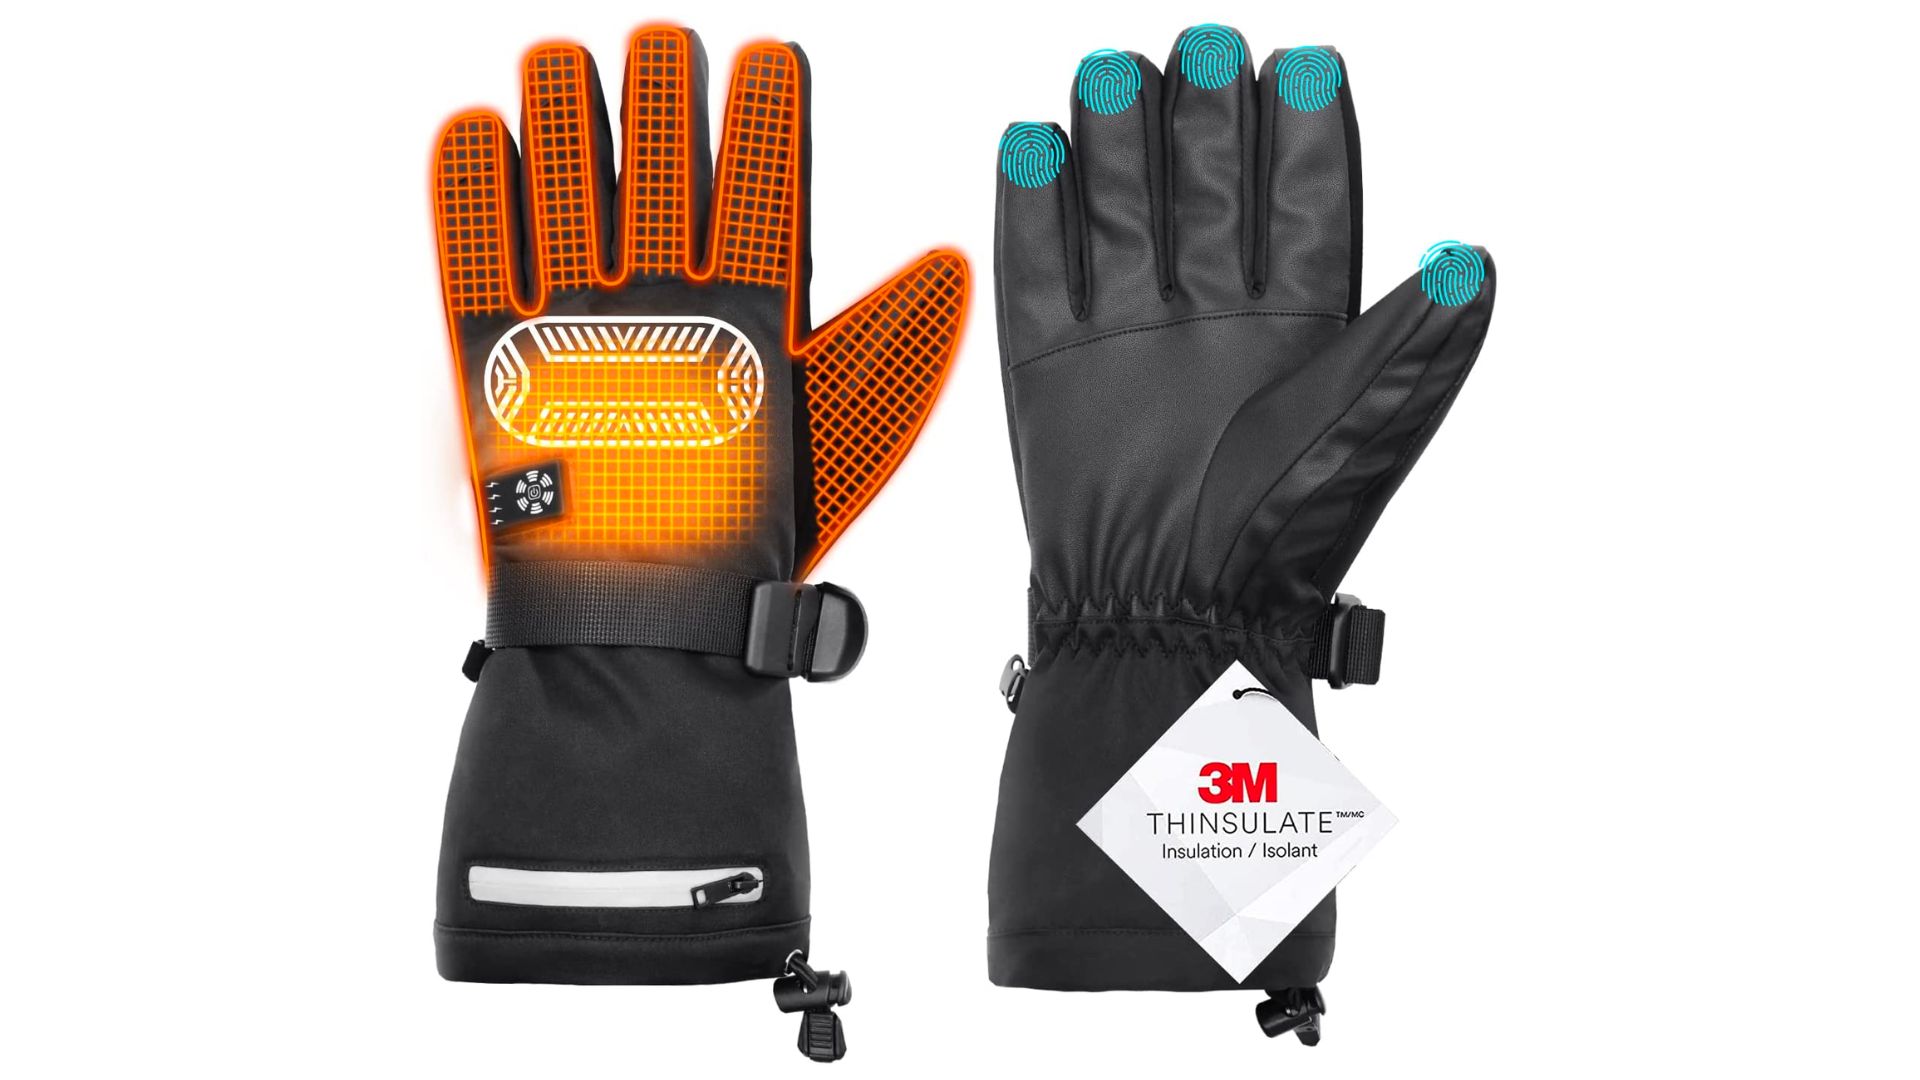 Karcore heated gloves